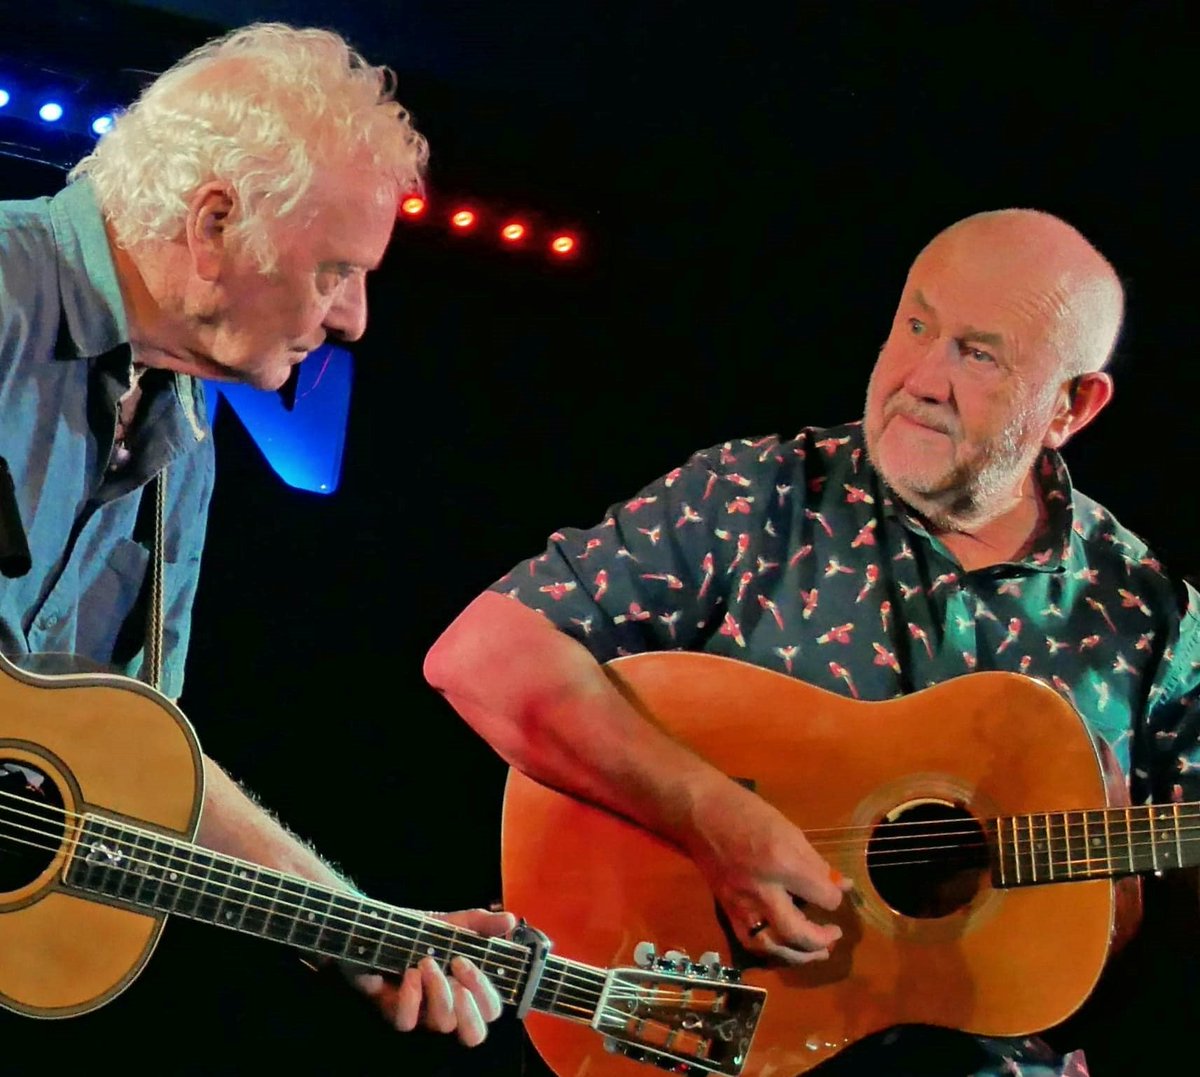 Two of the UK's best known & loved singers - @Lindisfarnbilly & @bobfoxmusic - bring 5 Star B&B to Gala Durham later this year. Billy & Bob will lead you through their favourite songs including original Lindisfarne classics. 📅 Fri 4 Oct, 7.30pm 🎟️ galadurham.co.uk/billy-mitchell…